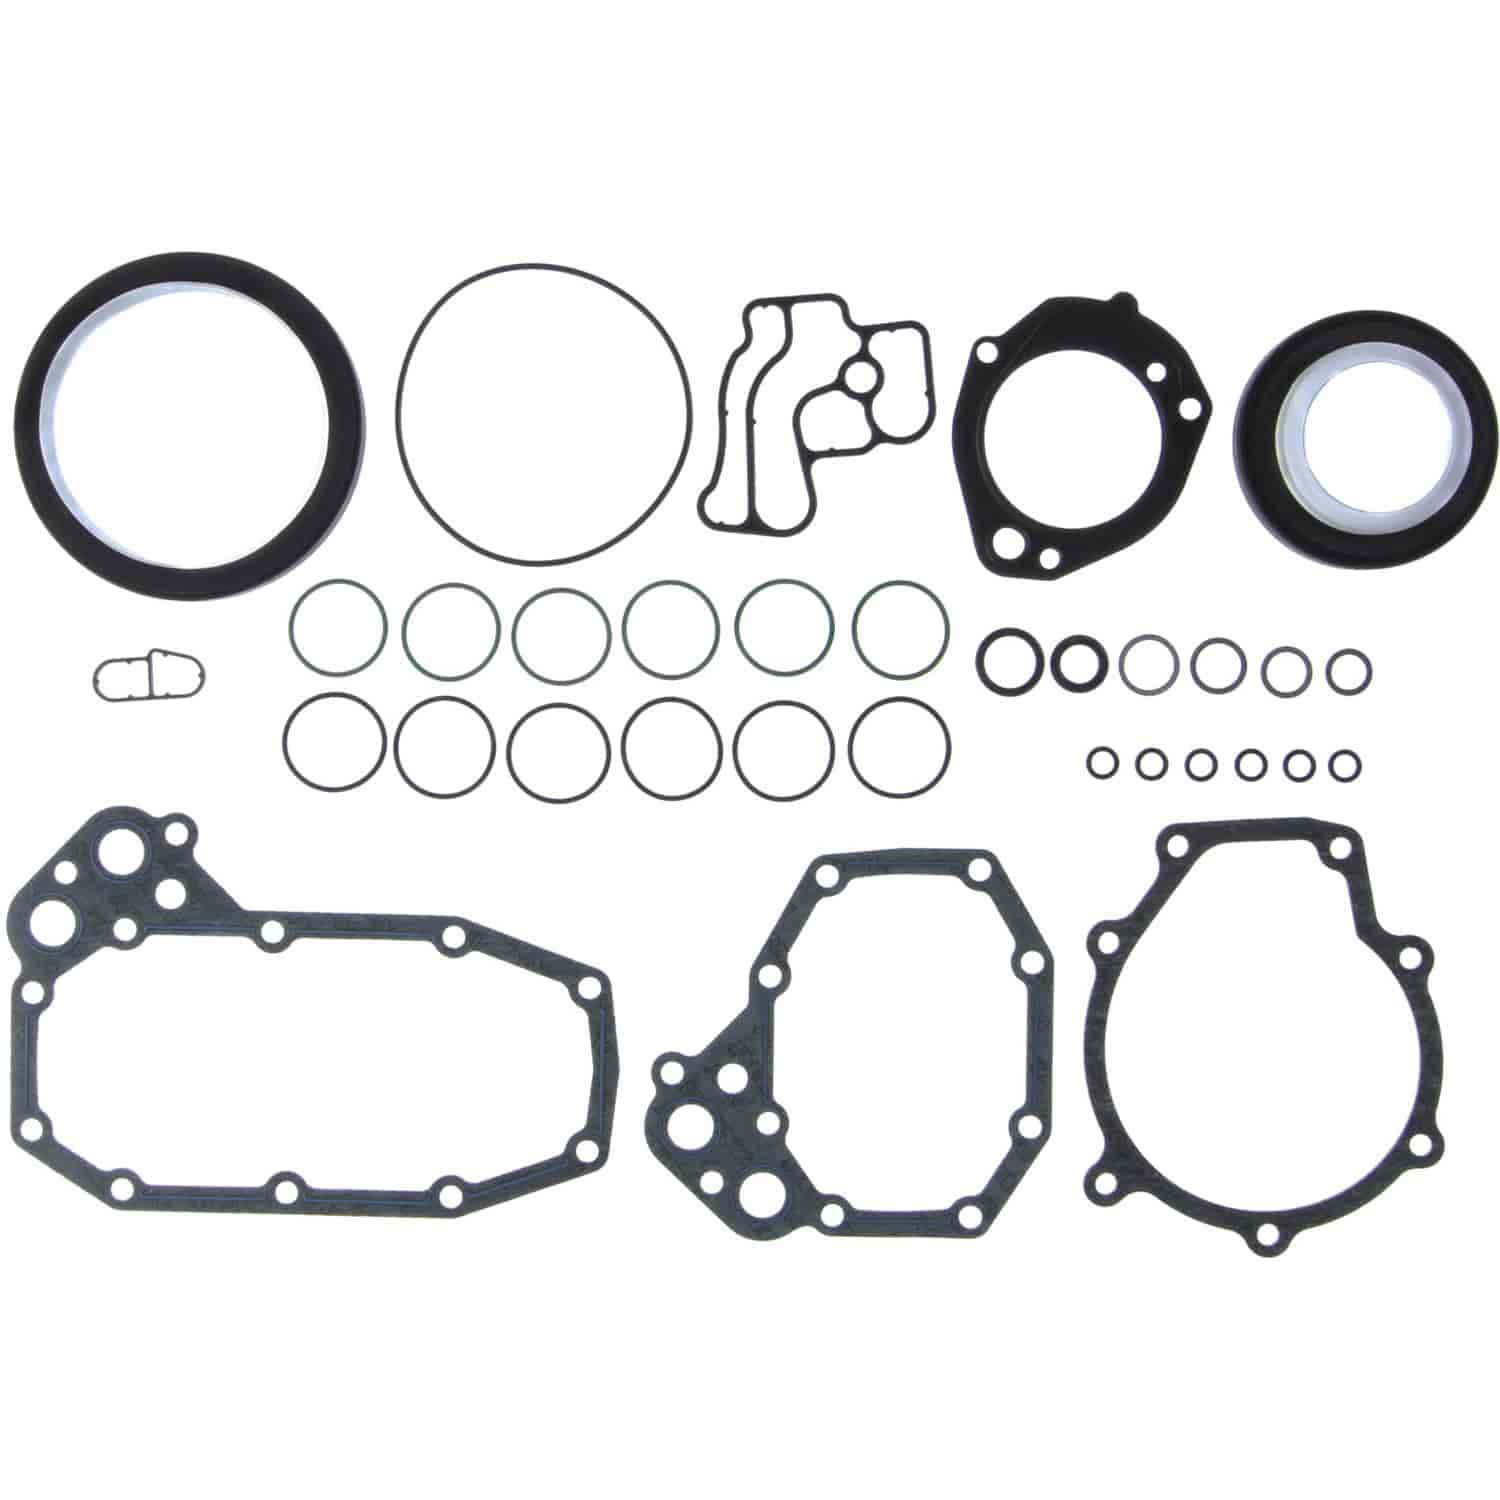 Conversion Set Mercedes Benz All OM900 Engines - Without Pan Gasket OE# 906 010 09 06